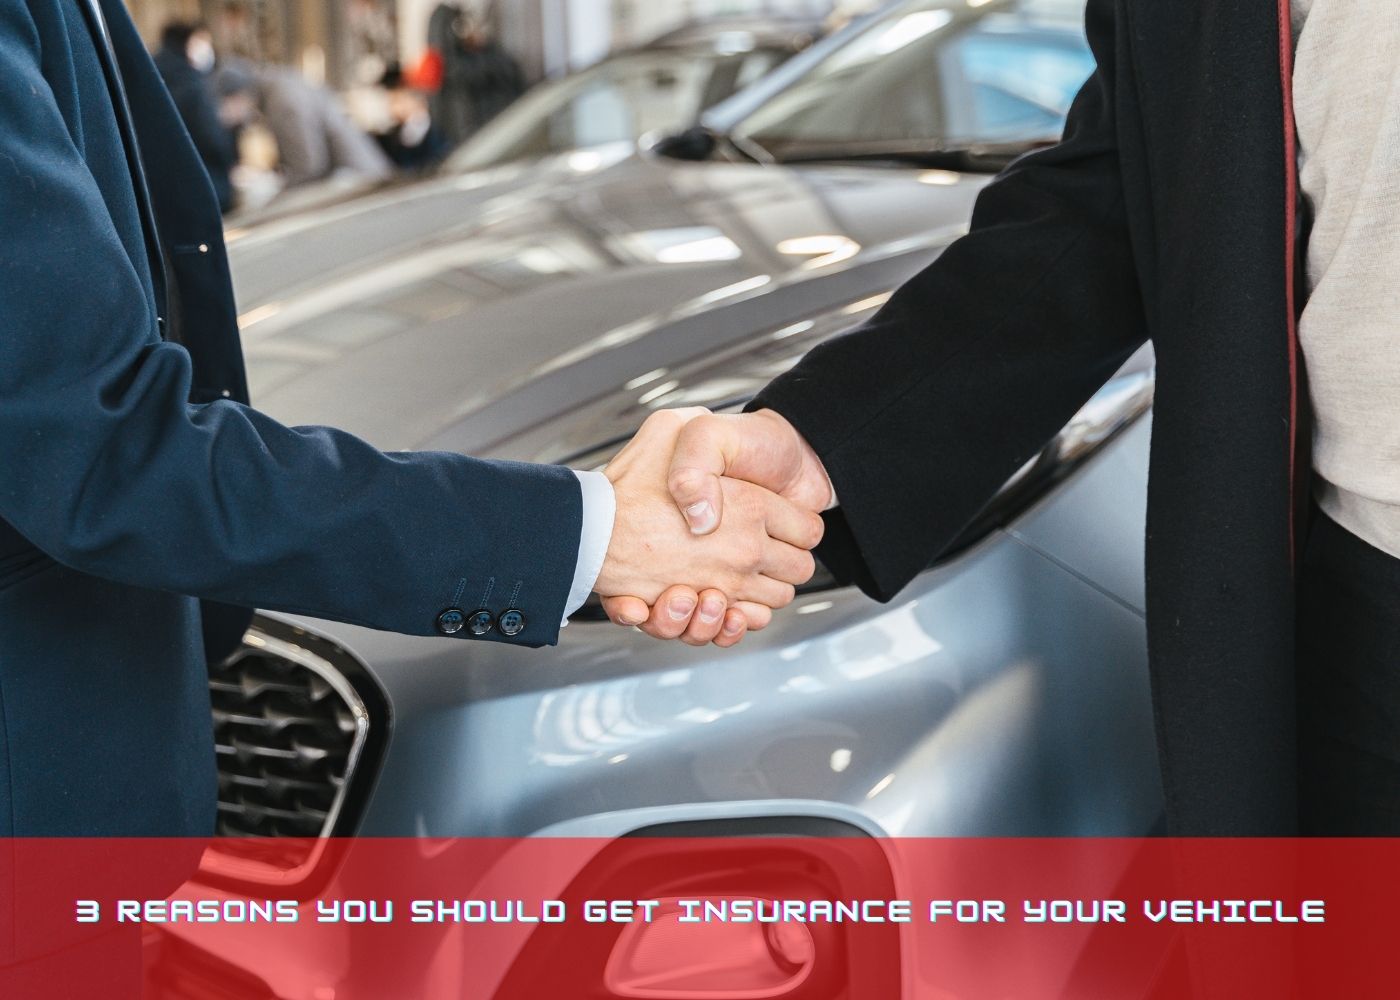 3 Reasons You Should Get Insurance for Your Vehicle